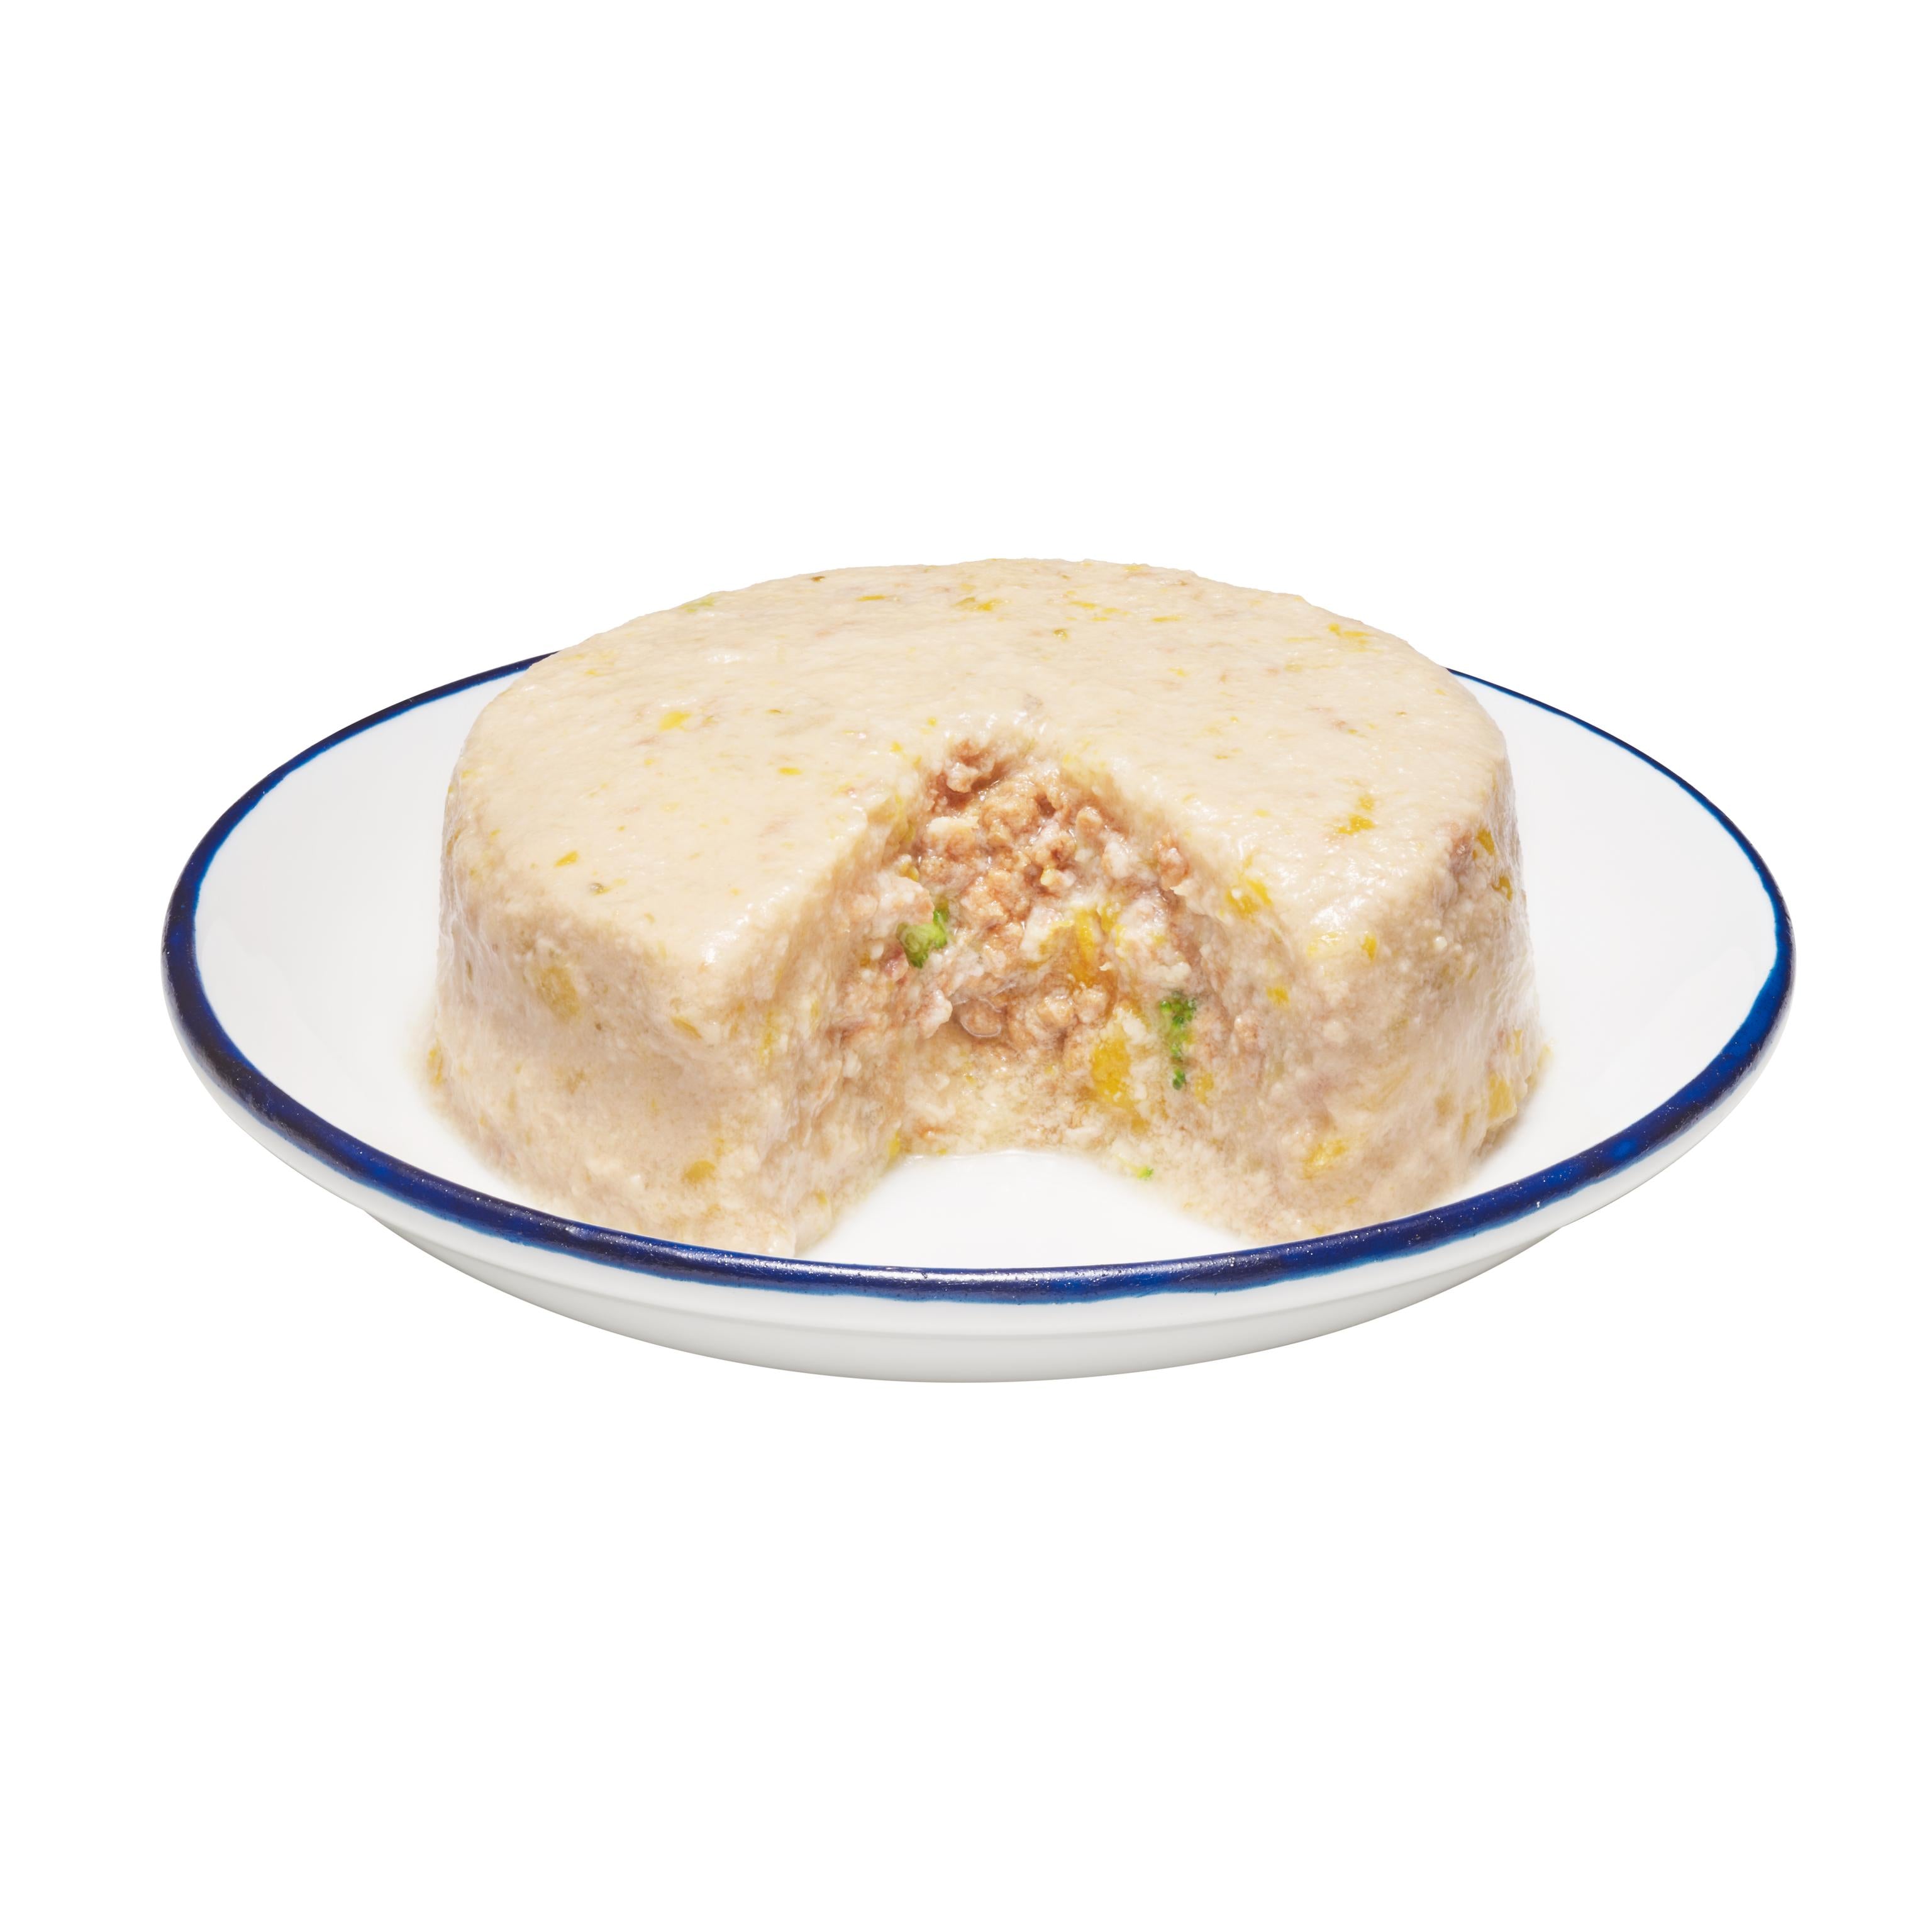 Farmers Market Meat Centre - Chicken Mousse with shredded Tuna Centre, Pumpkin & Broccoli 80g